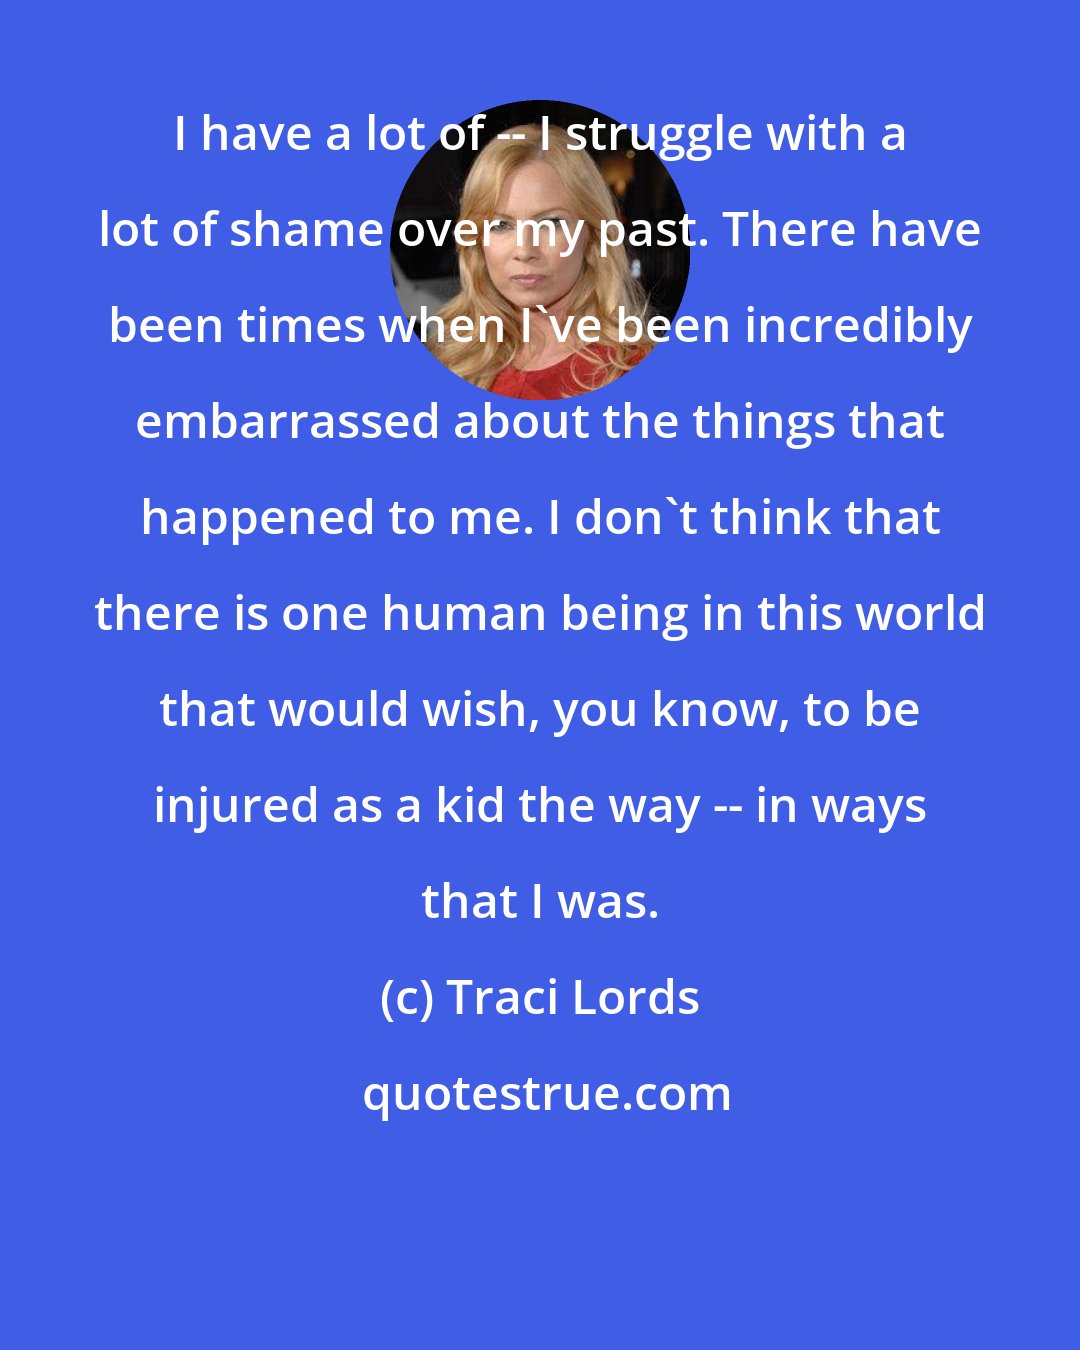 Traci Lords: I have a lot of -- I struggle with a lot of shame over my past. There have been times when I've been incredibly embarrassed about the things that happened to me. I don't think that there is one human being in this world that would wish, you know, to be injured as a kid the way -- in ways that I was.